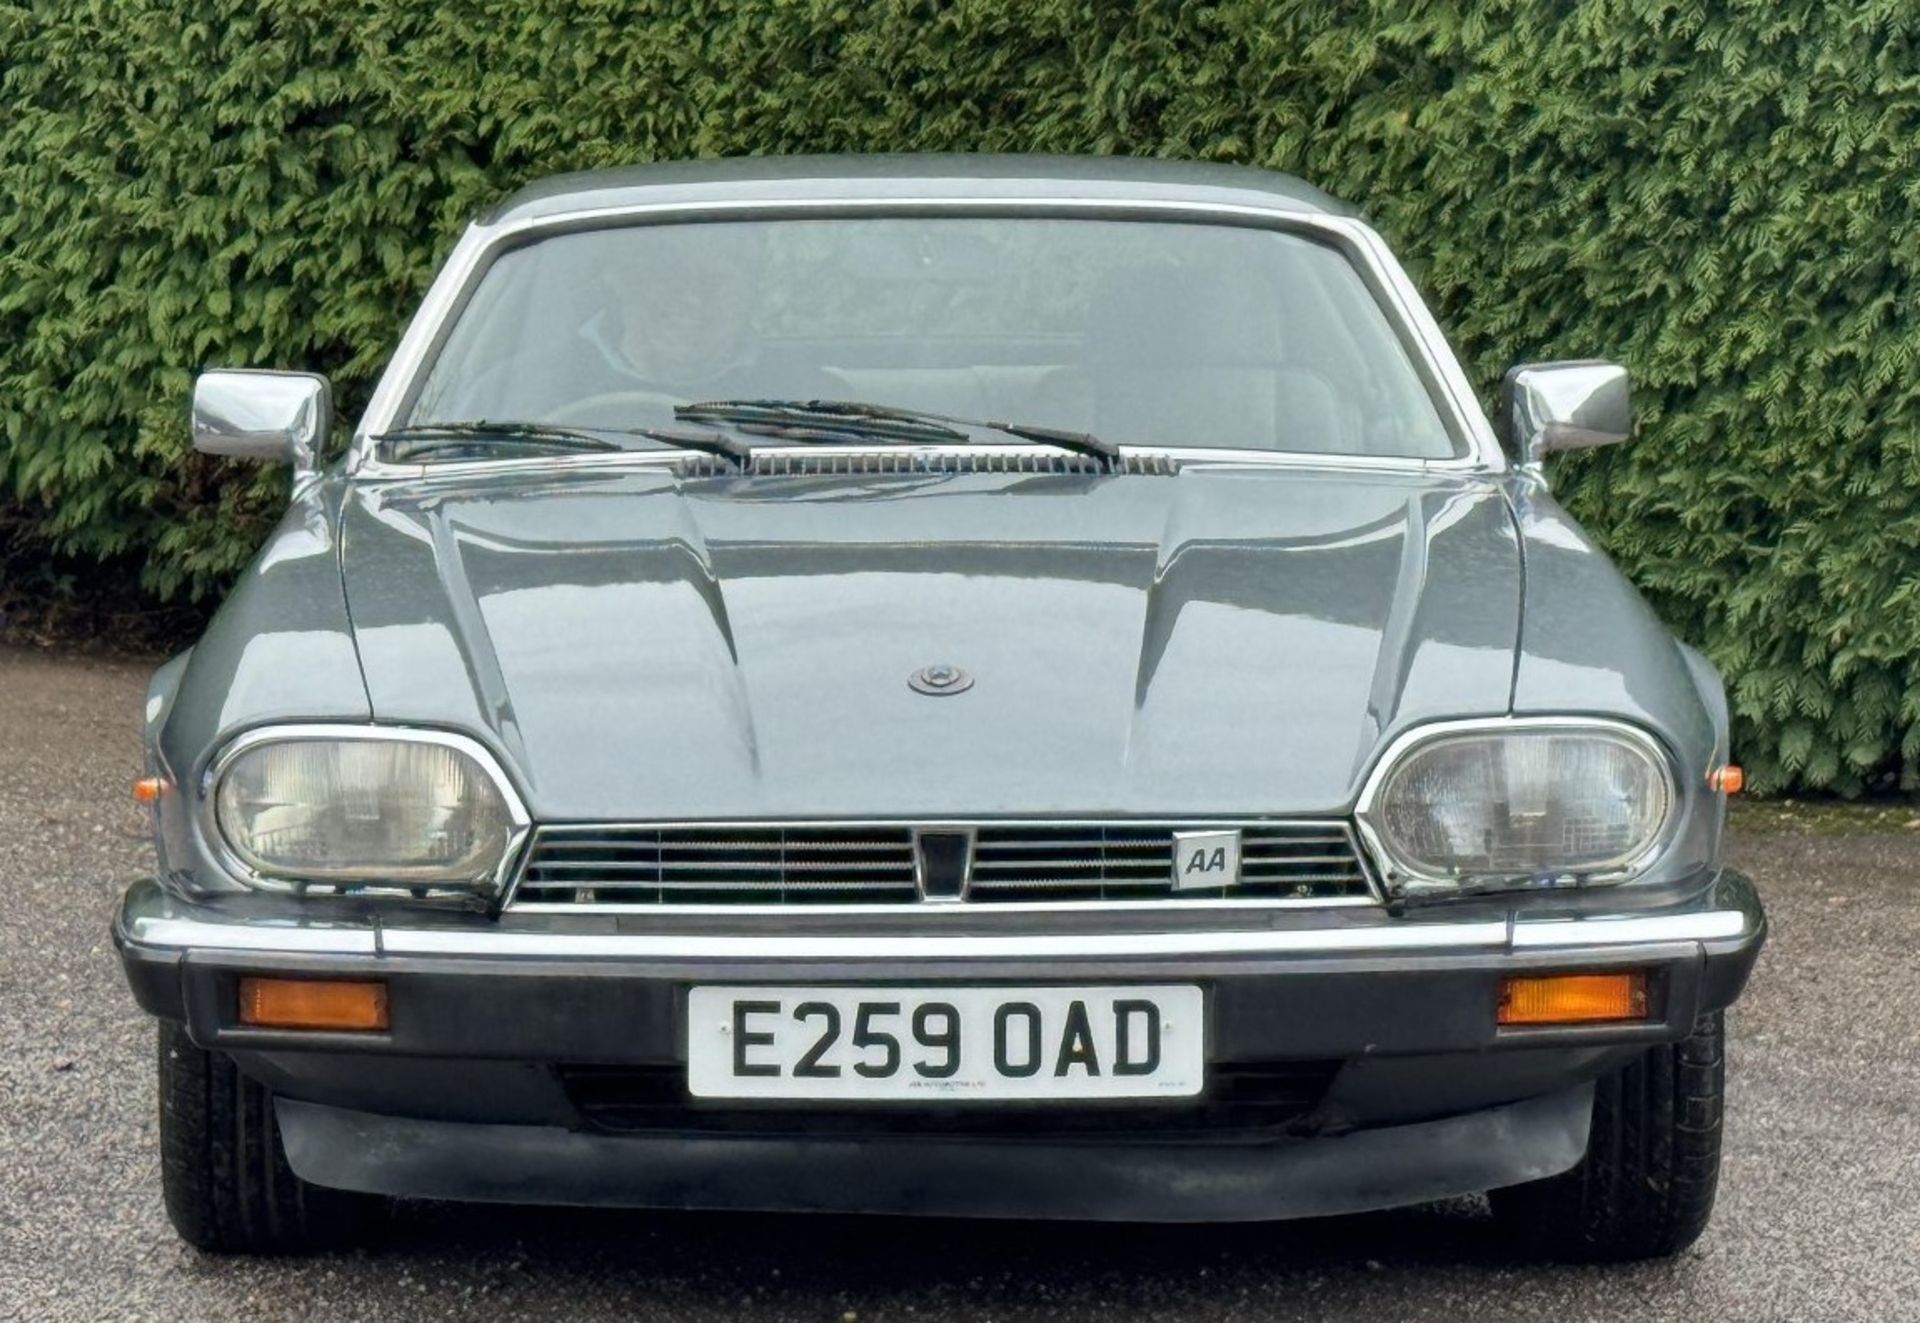 1988 Jaguar XJ-S 3.6 Coupe Registration number E259 OAD Metallic light blue with a half leather - Image 9 of 24